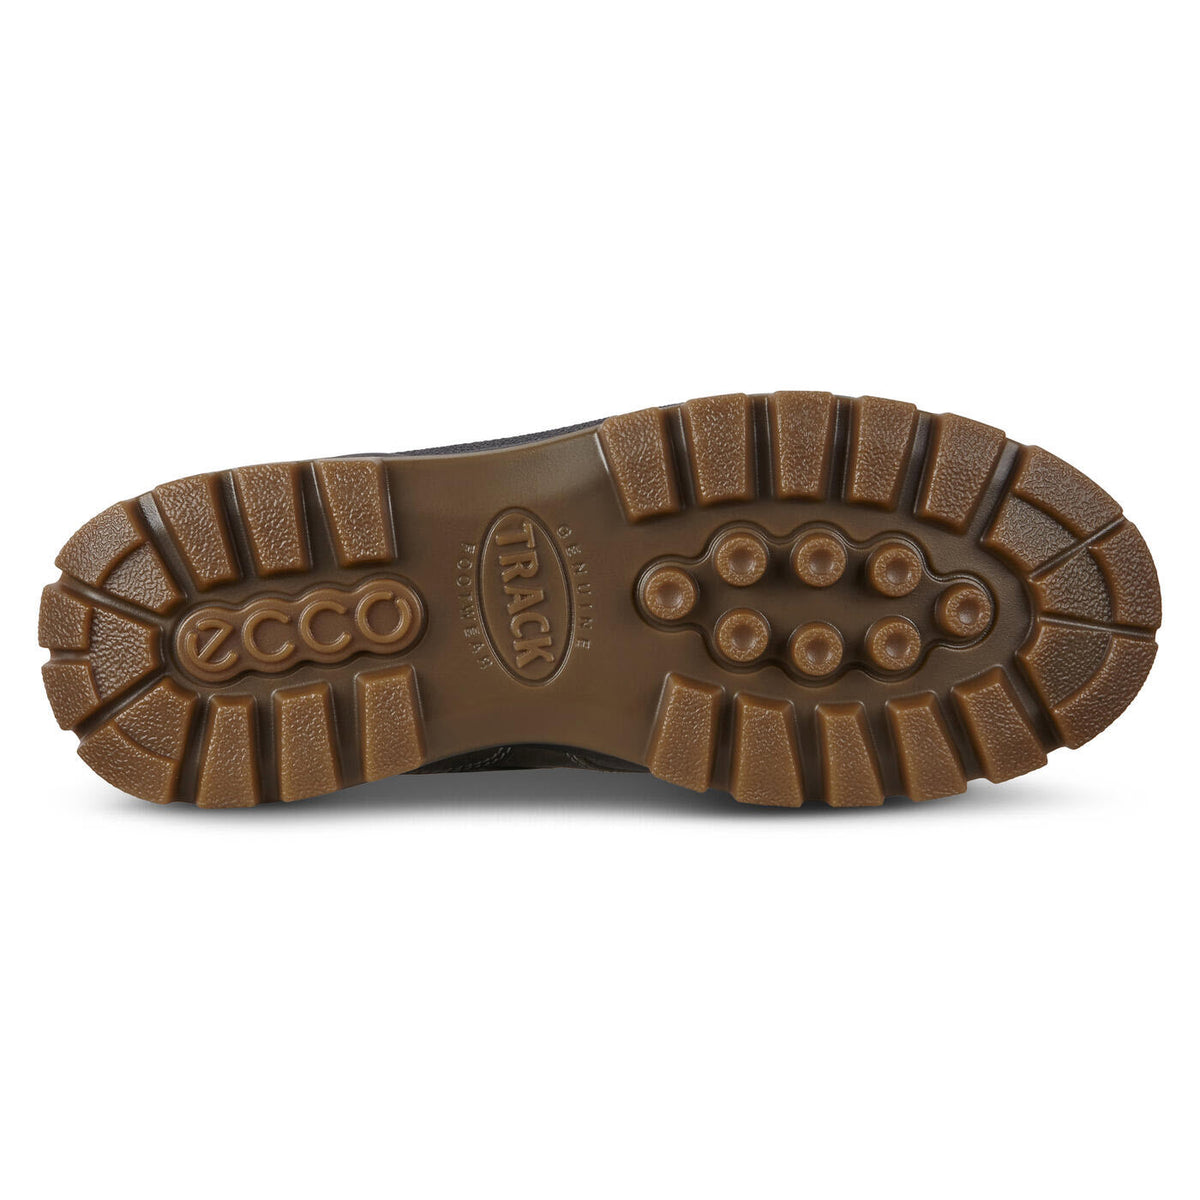 Sole of a brown Ecco Track 25 Primaloft Boot displaying tread pattern and brand logo.